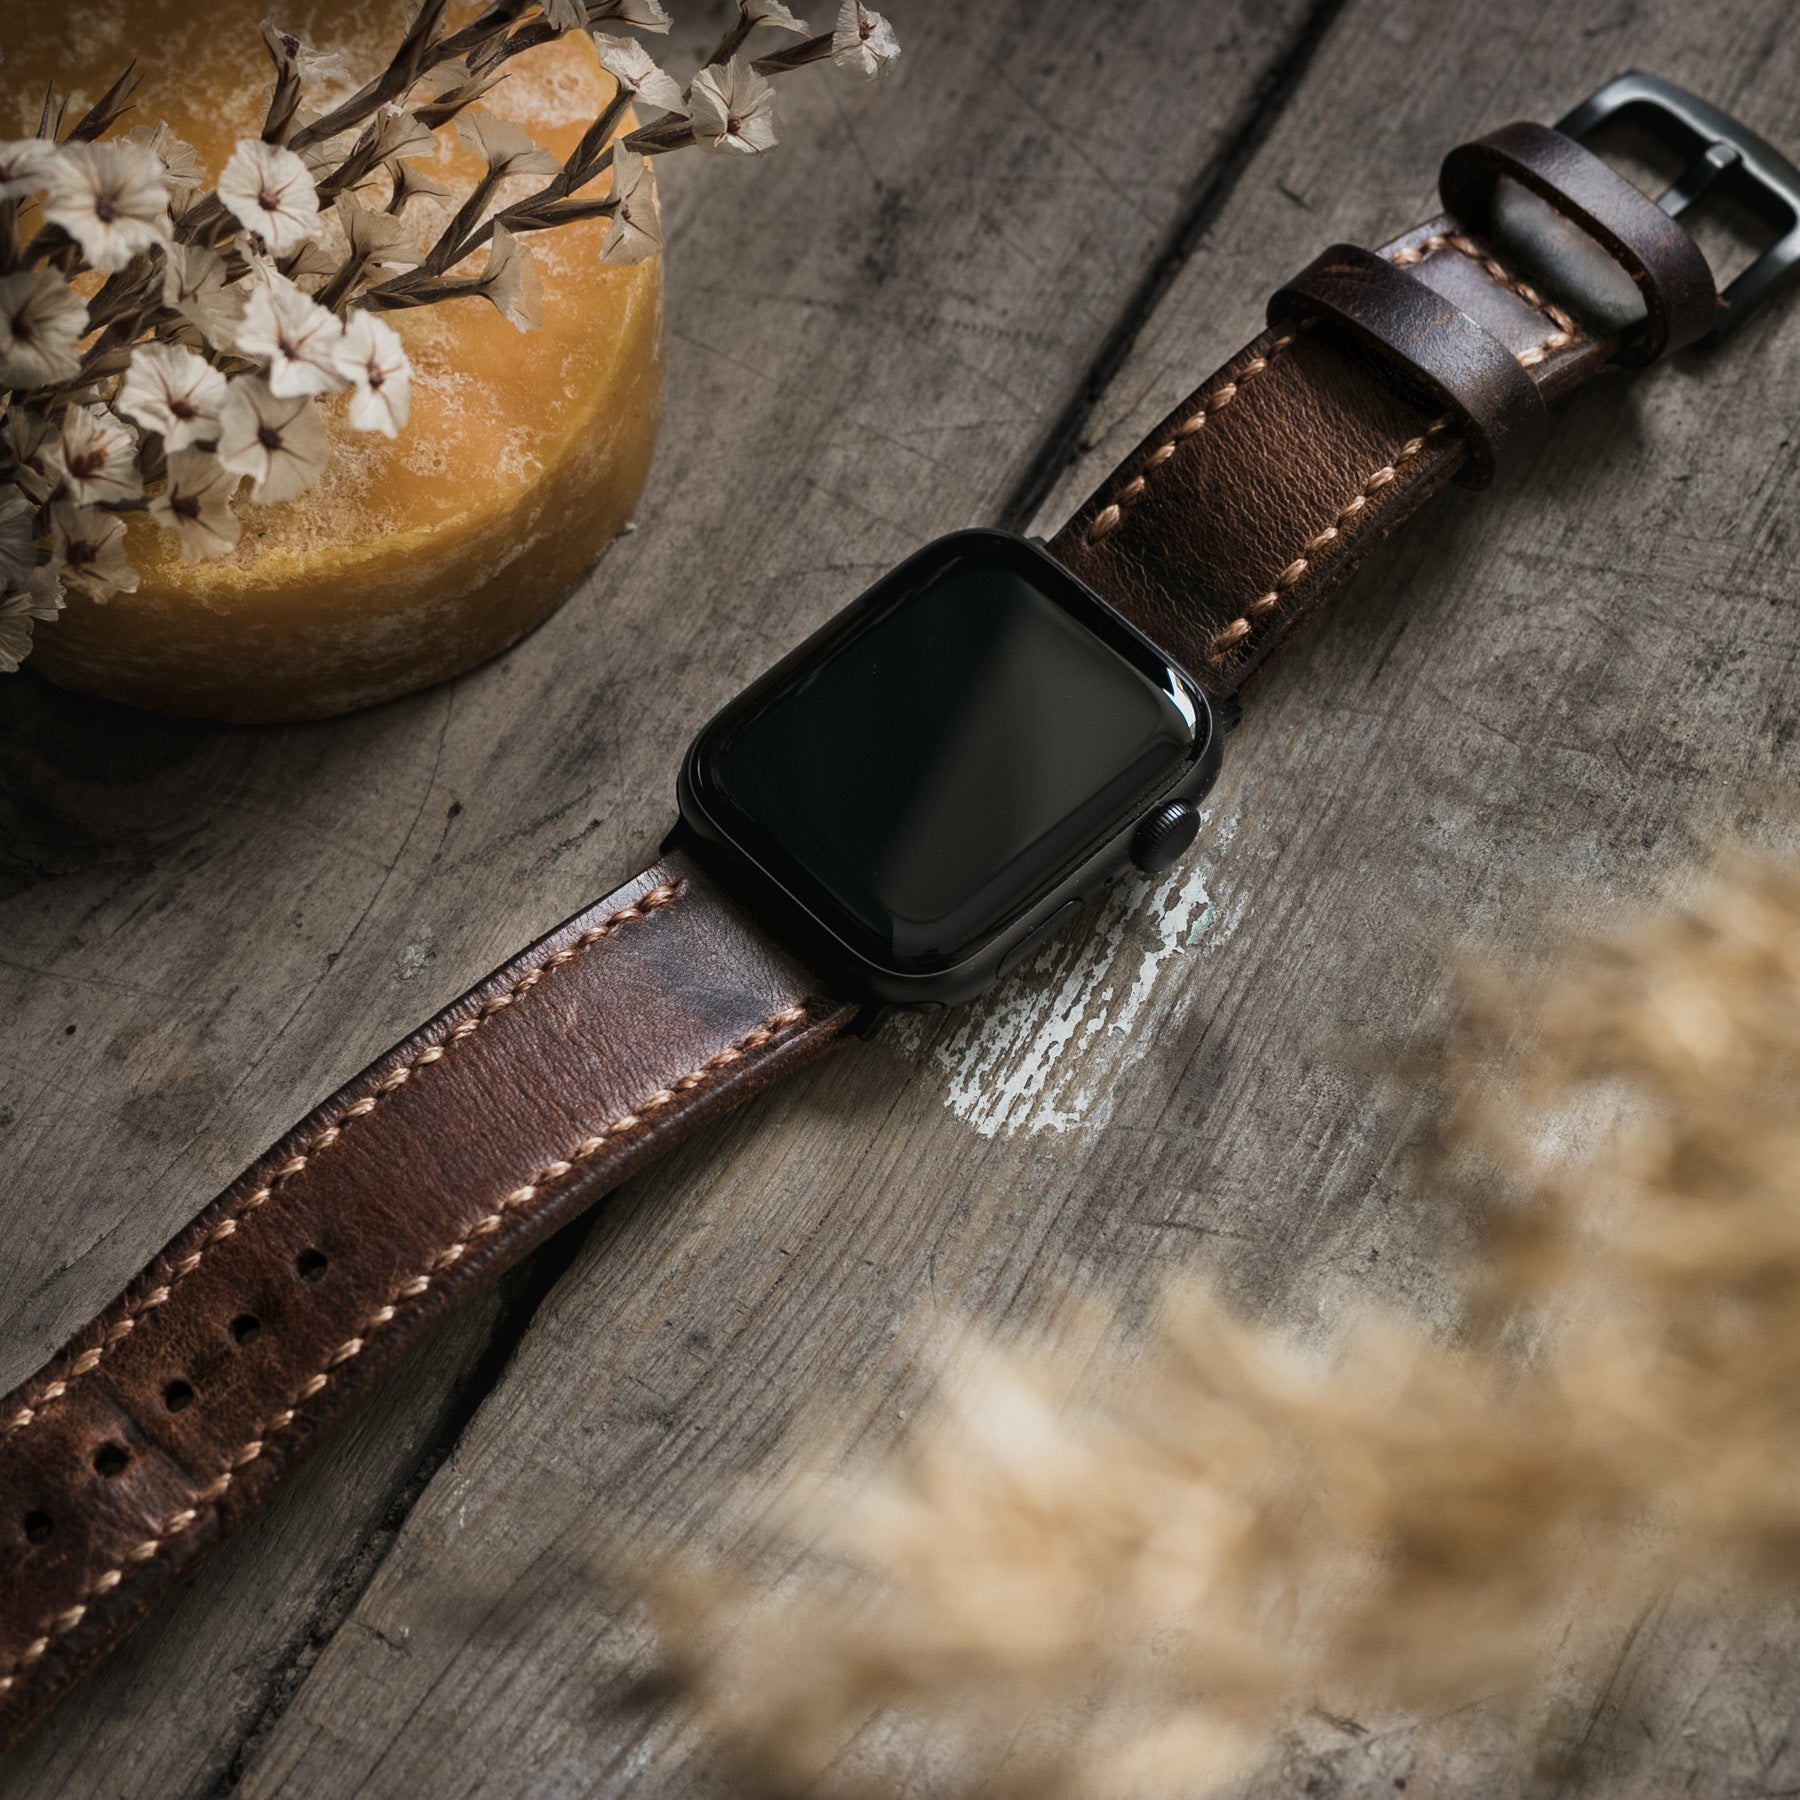 Made a quick Apple watch strap from some scraps : r/Leathercraft